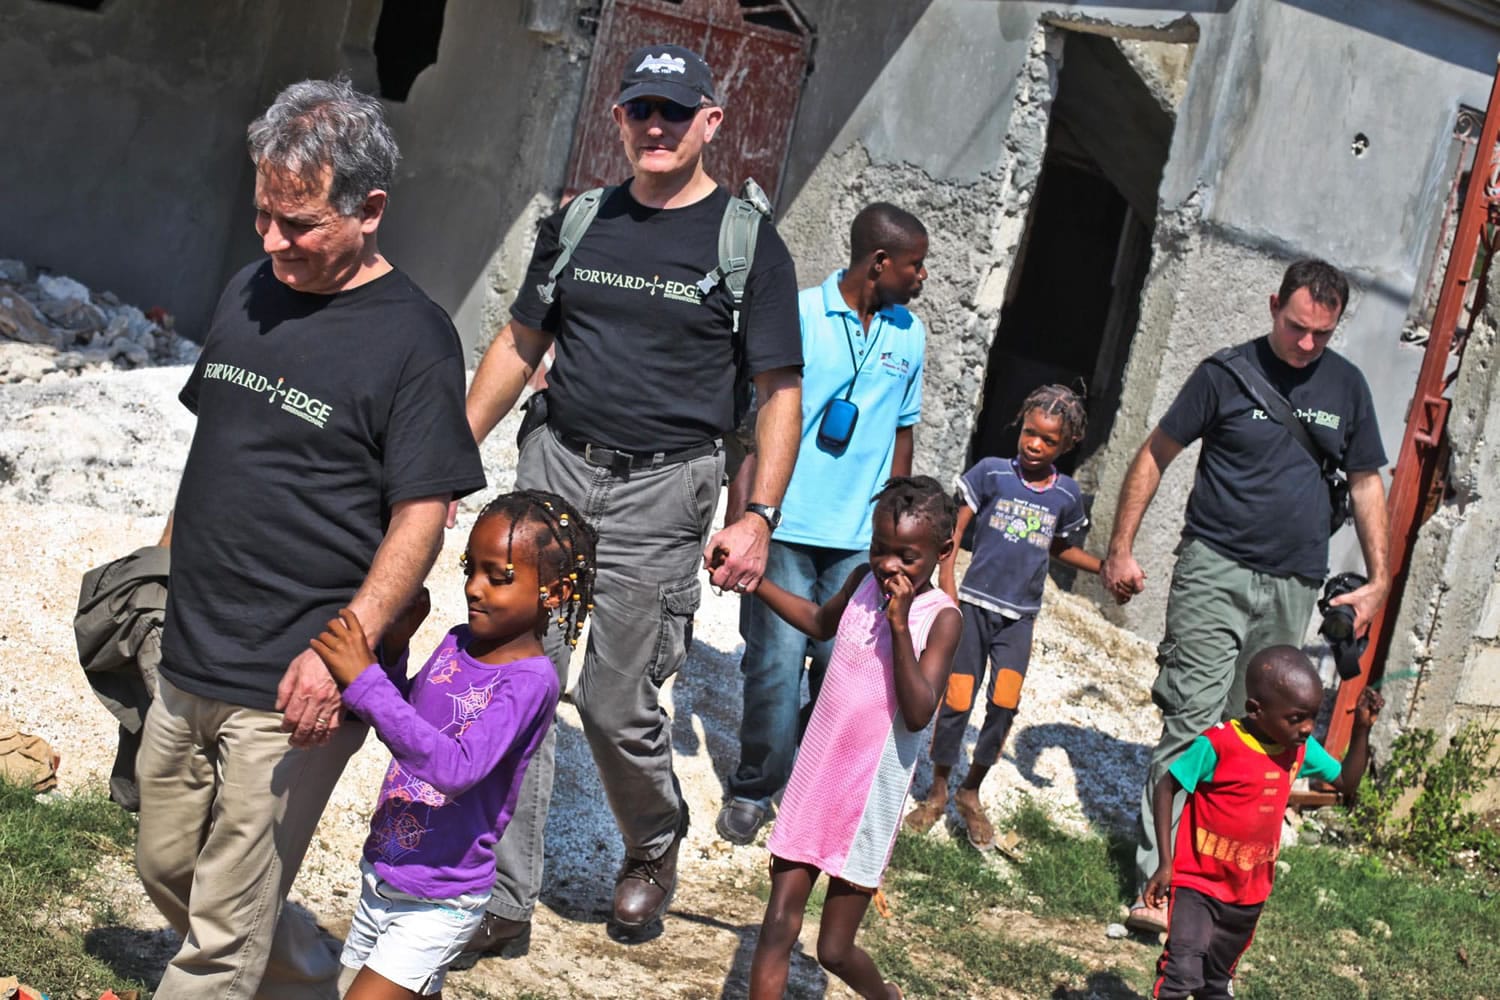 Joe Anfuso, from left, and Forward Edge International team members Nick Rogers and Bob Craddock walk with a group of children during a 2010 mission trip to Port-au-Prince.